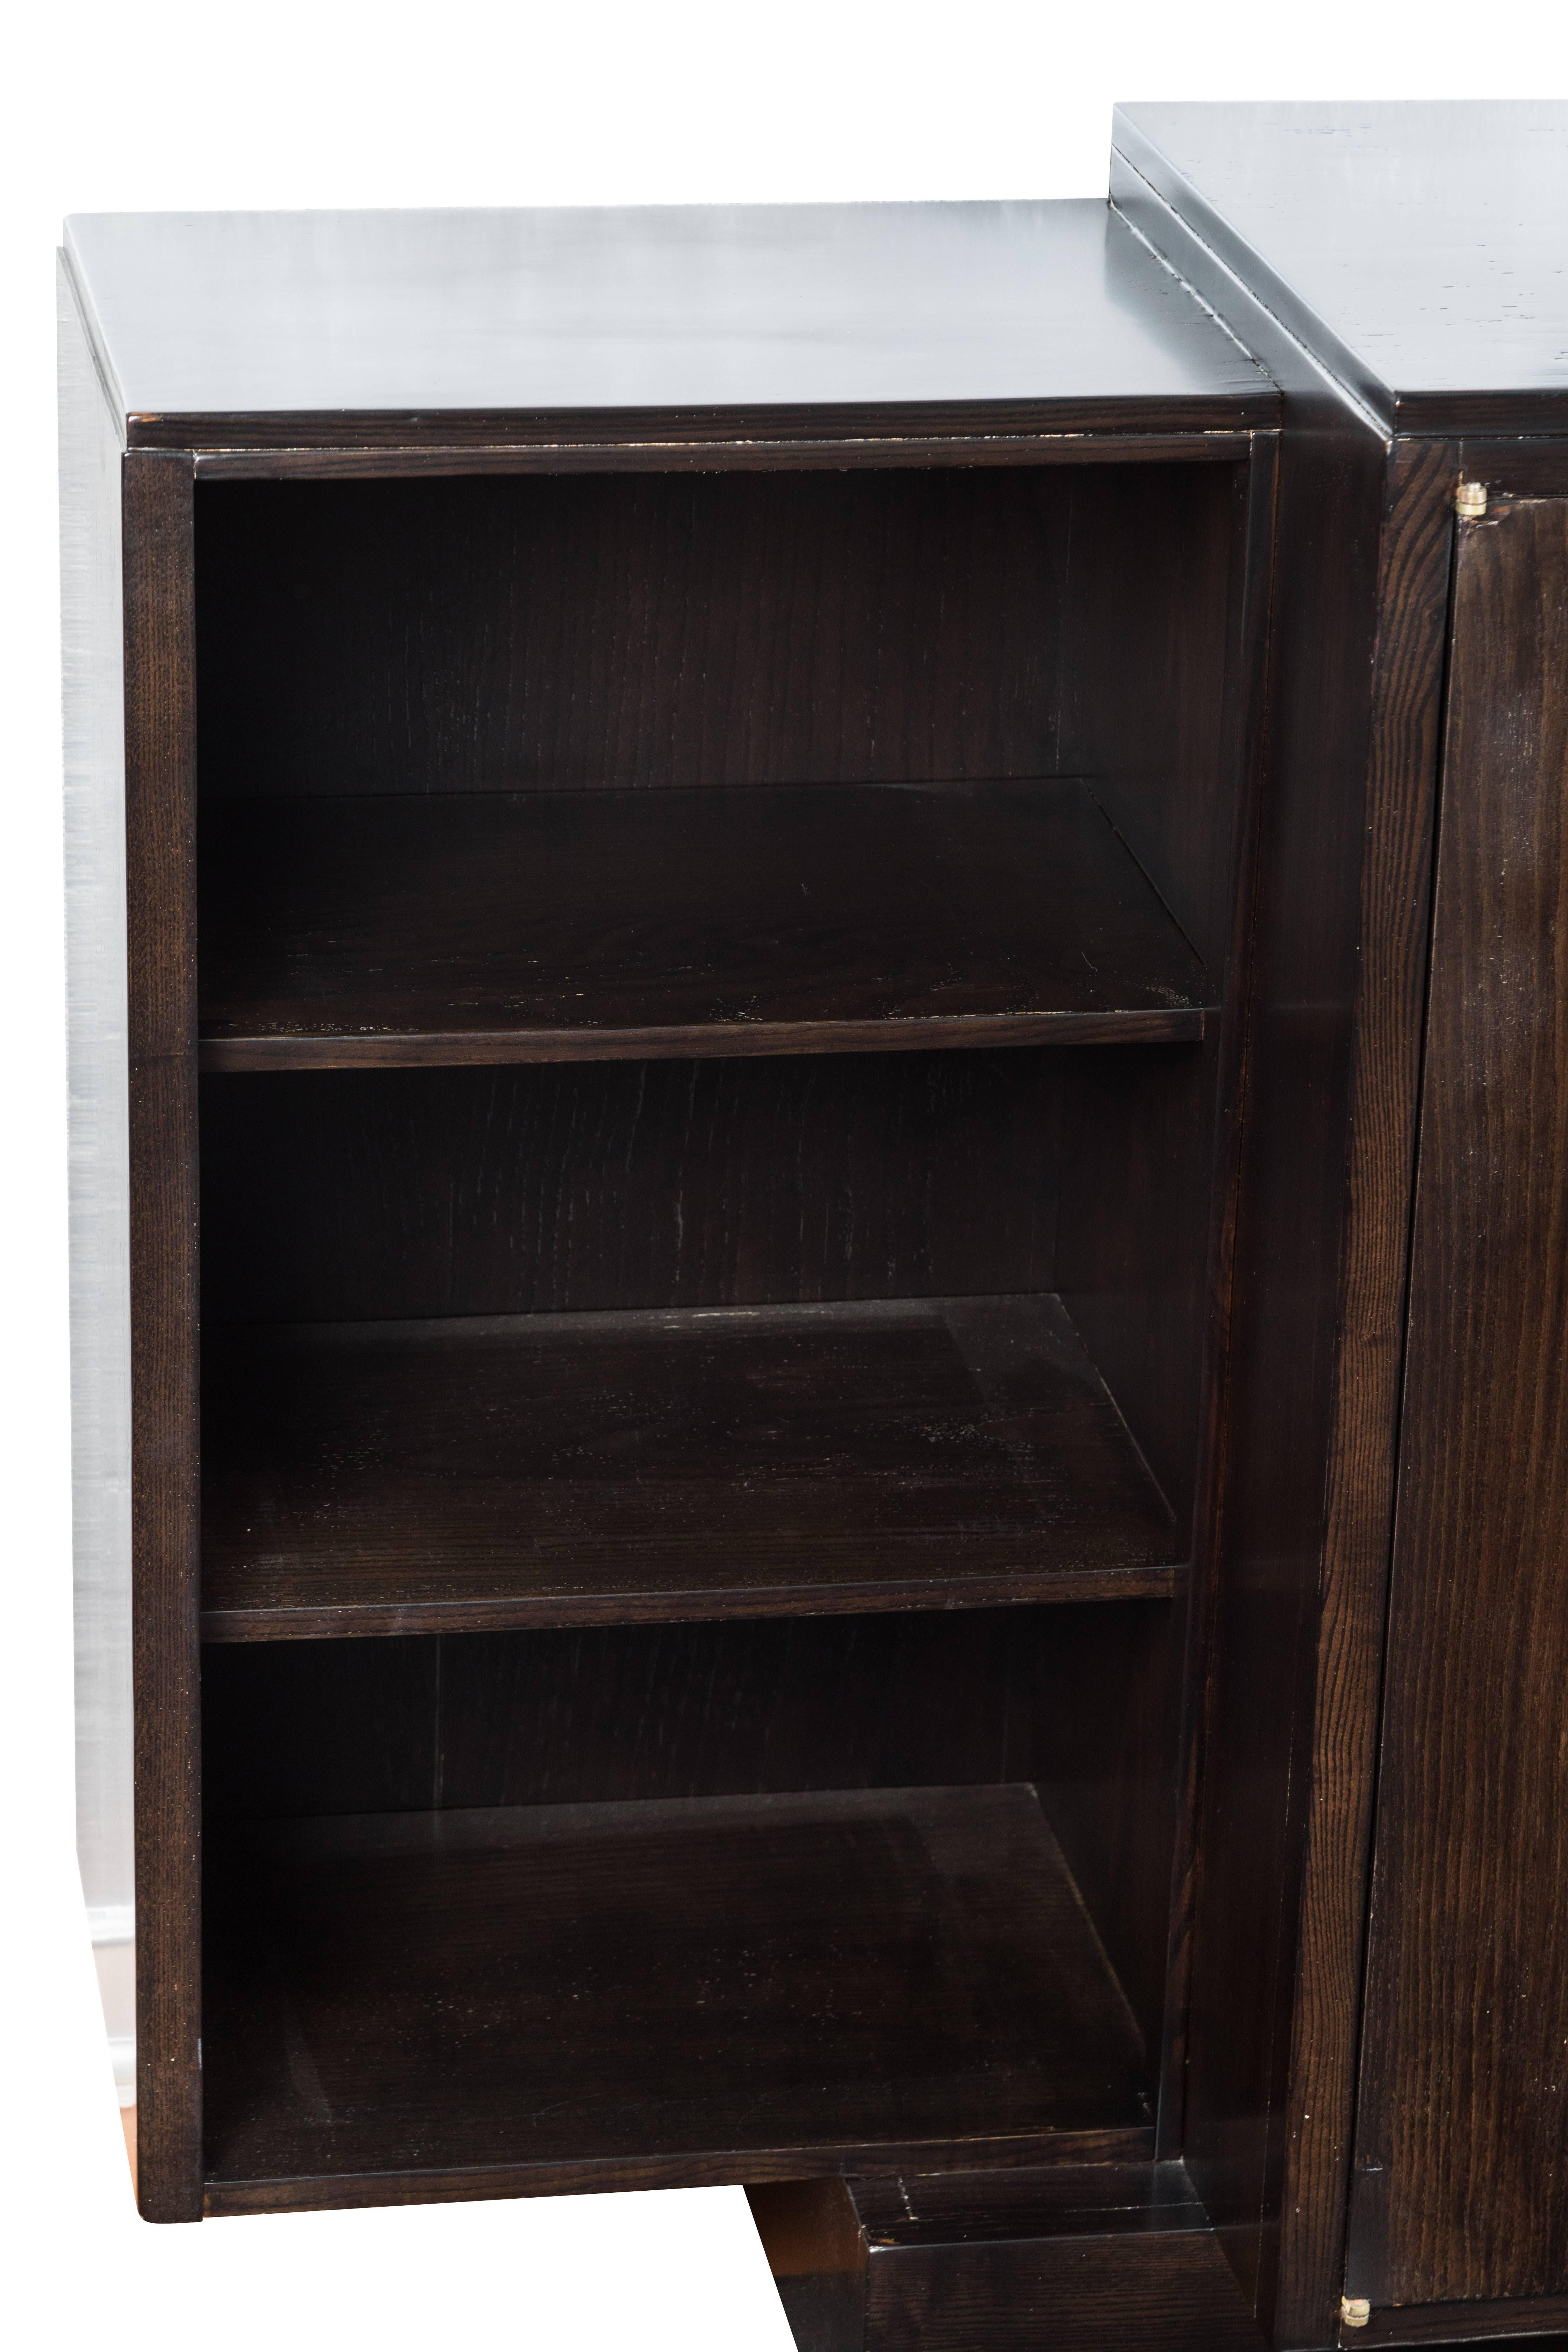 This vintage cabinet was designed by Émile-Jacques Ruhlmann. It is crafted from dark ebonized wood that houses spacious shelves and drawers behind doors.